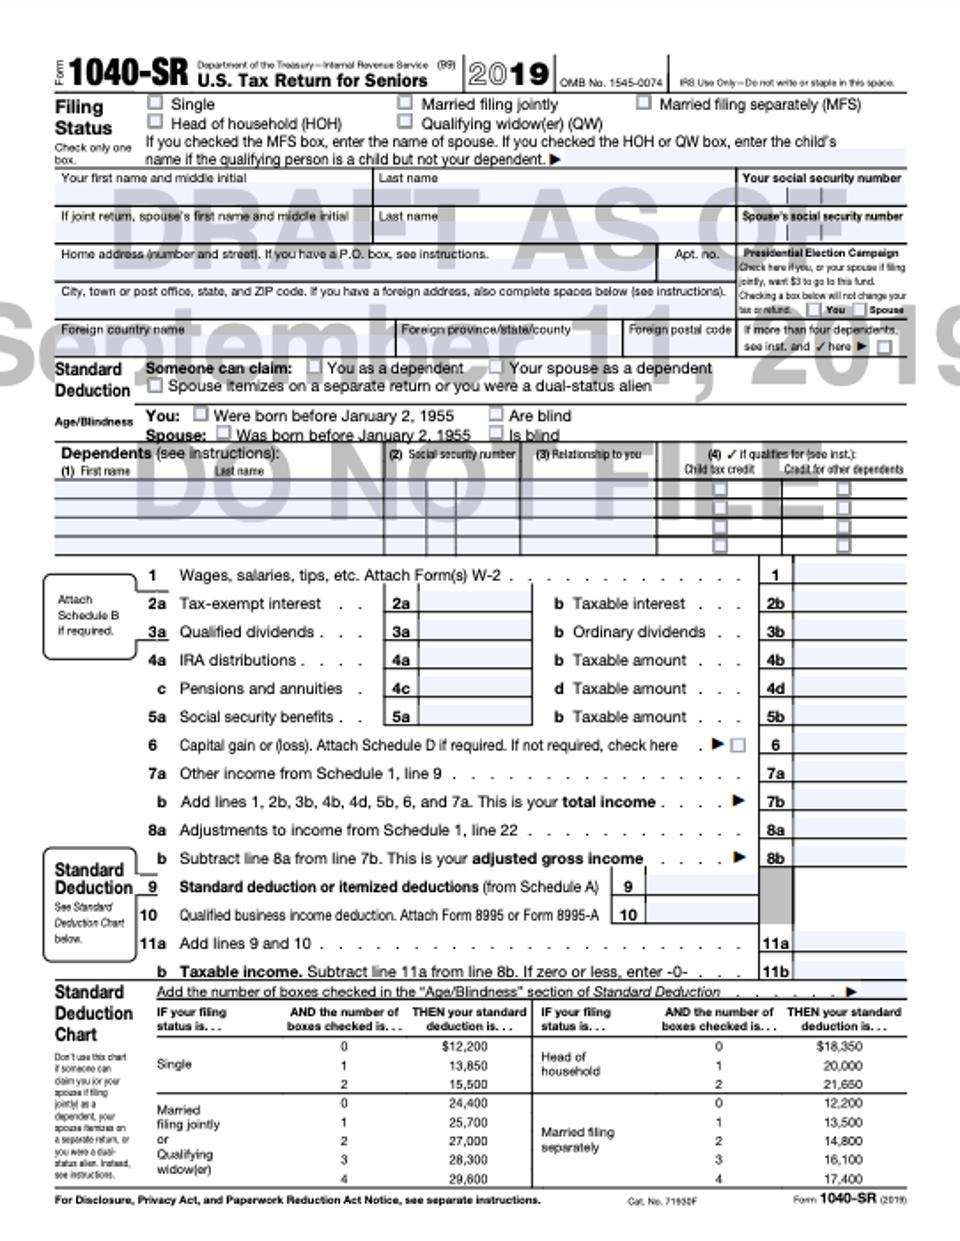 IRS Offers New Look At Form 1040